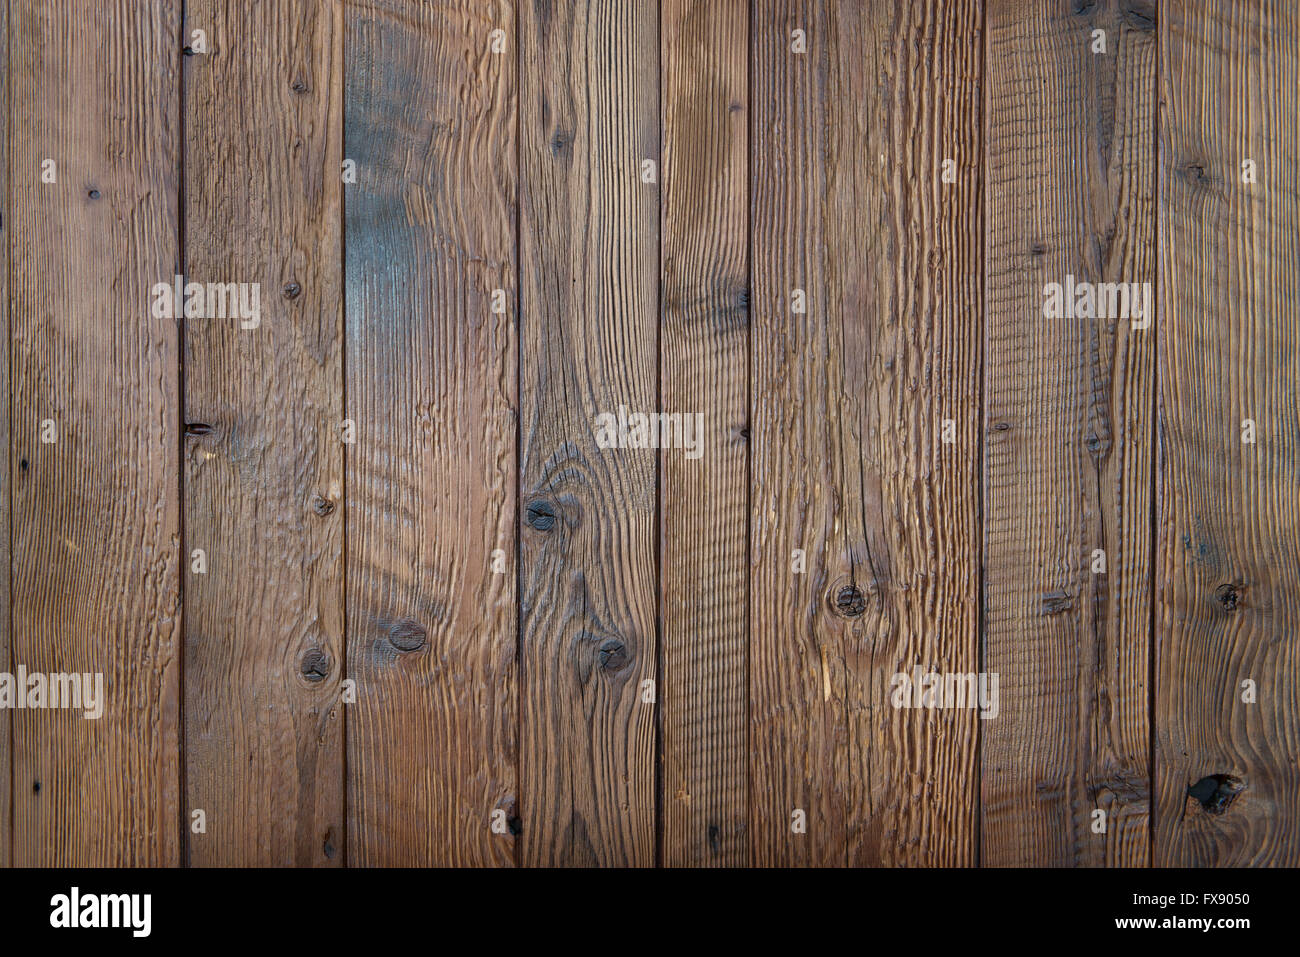 rustic wooden surface Stock Photo